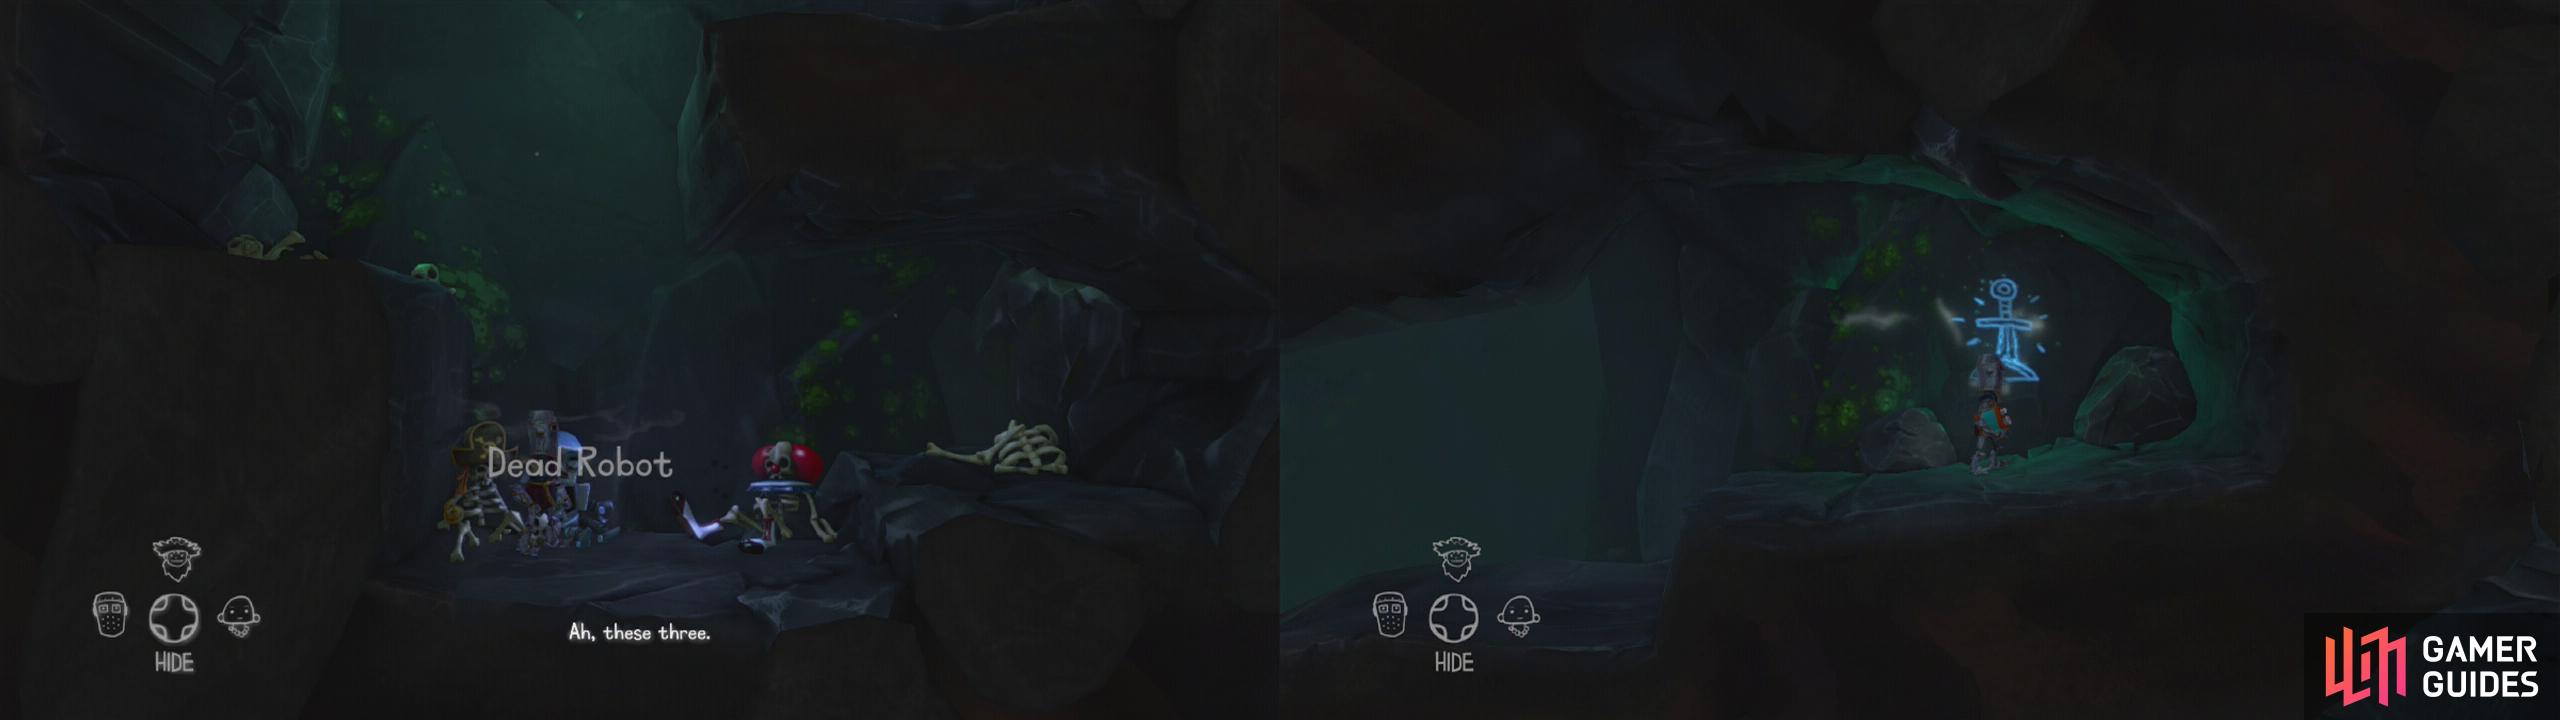 from the monster room, climb up to the left to find a dead robot (left) and another Cave Painting (right).